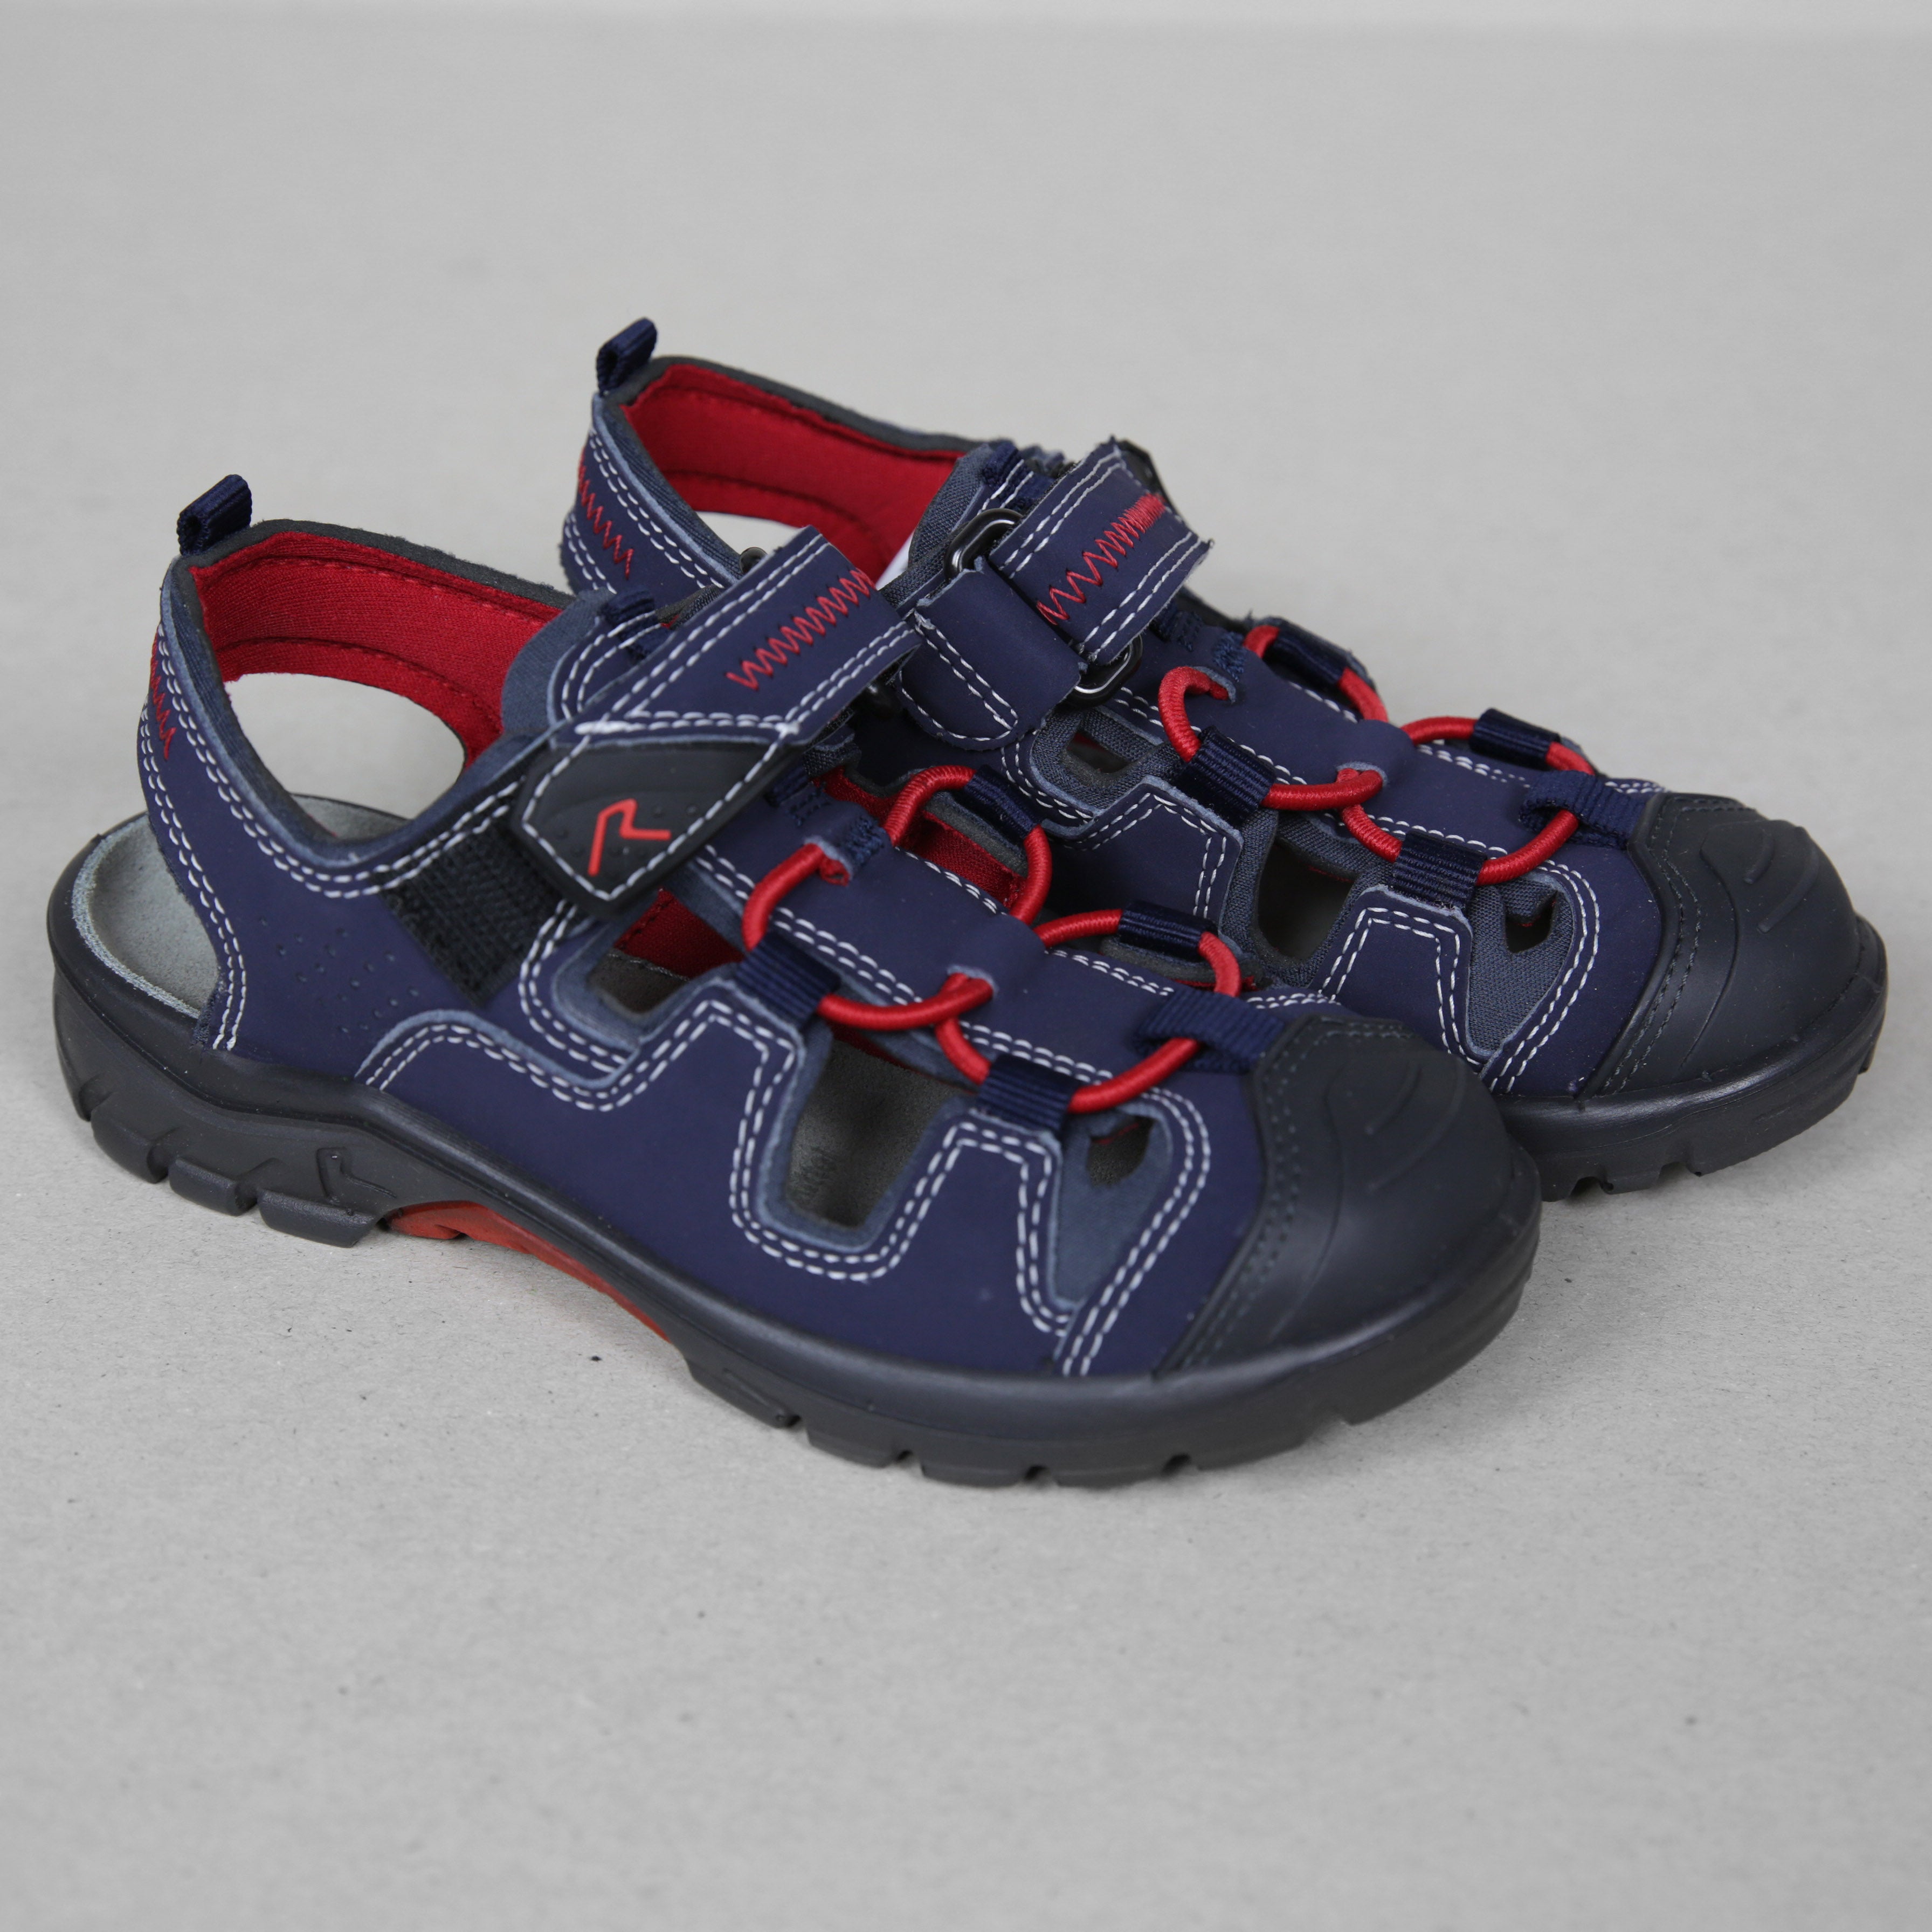 Ricosta Reyk Boys Blue & Red Leather Closed Toe Sandals UK 1 / EUR 33